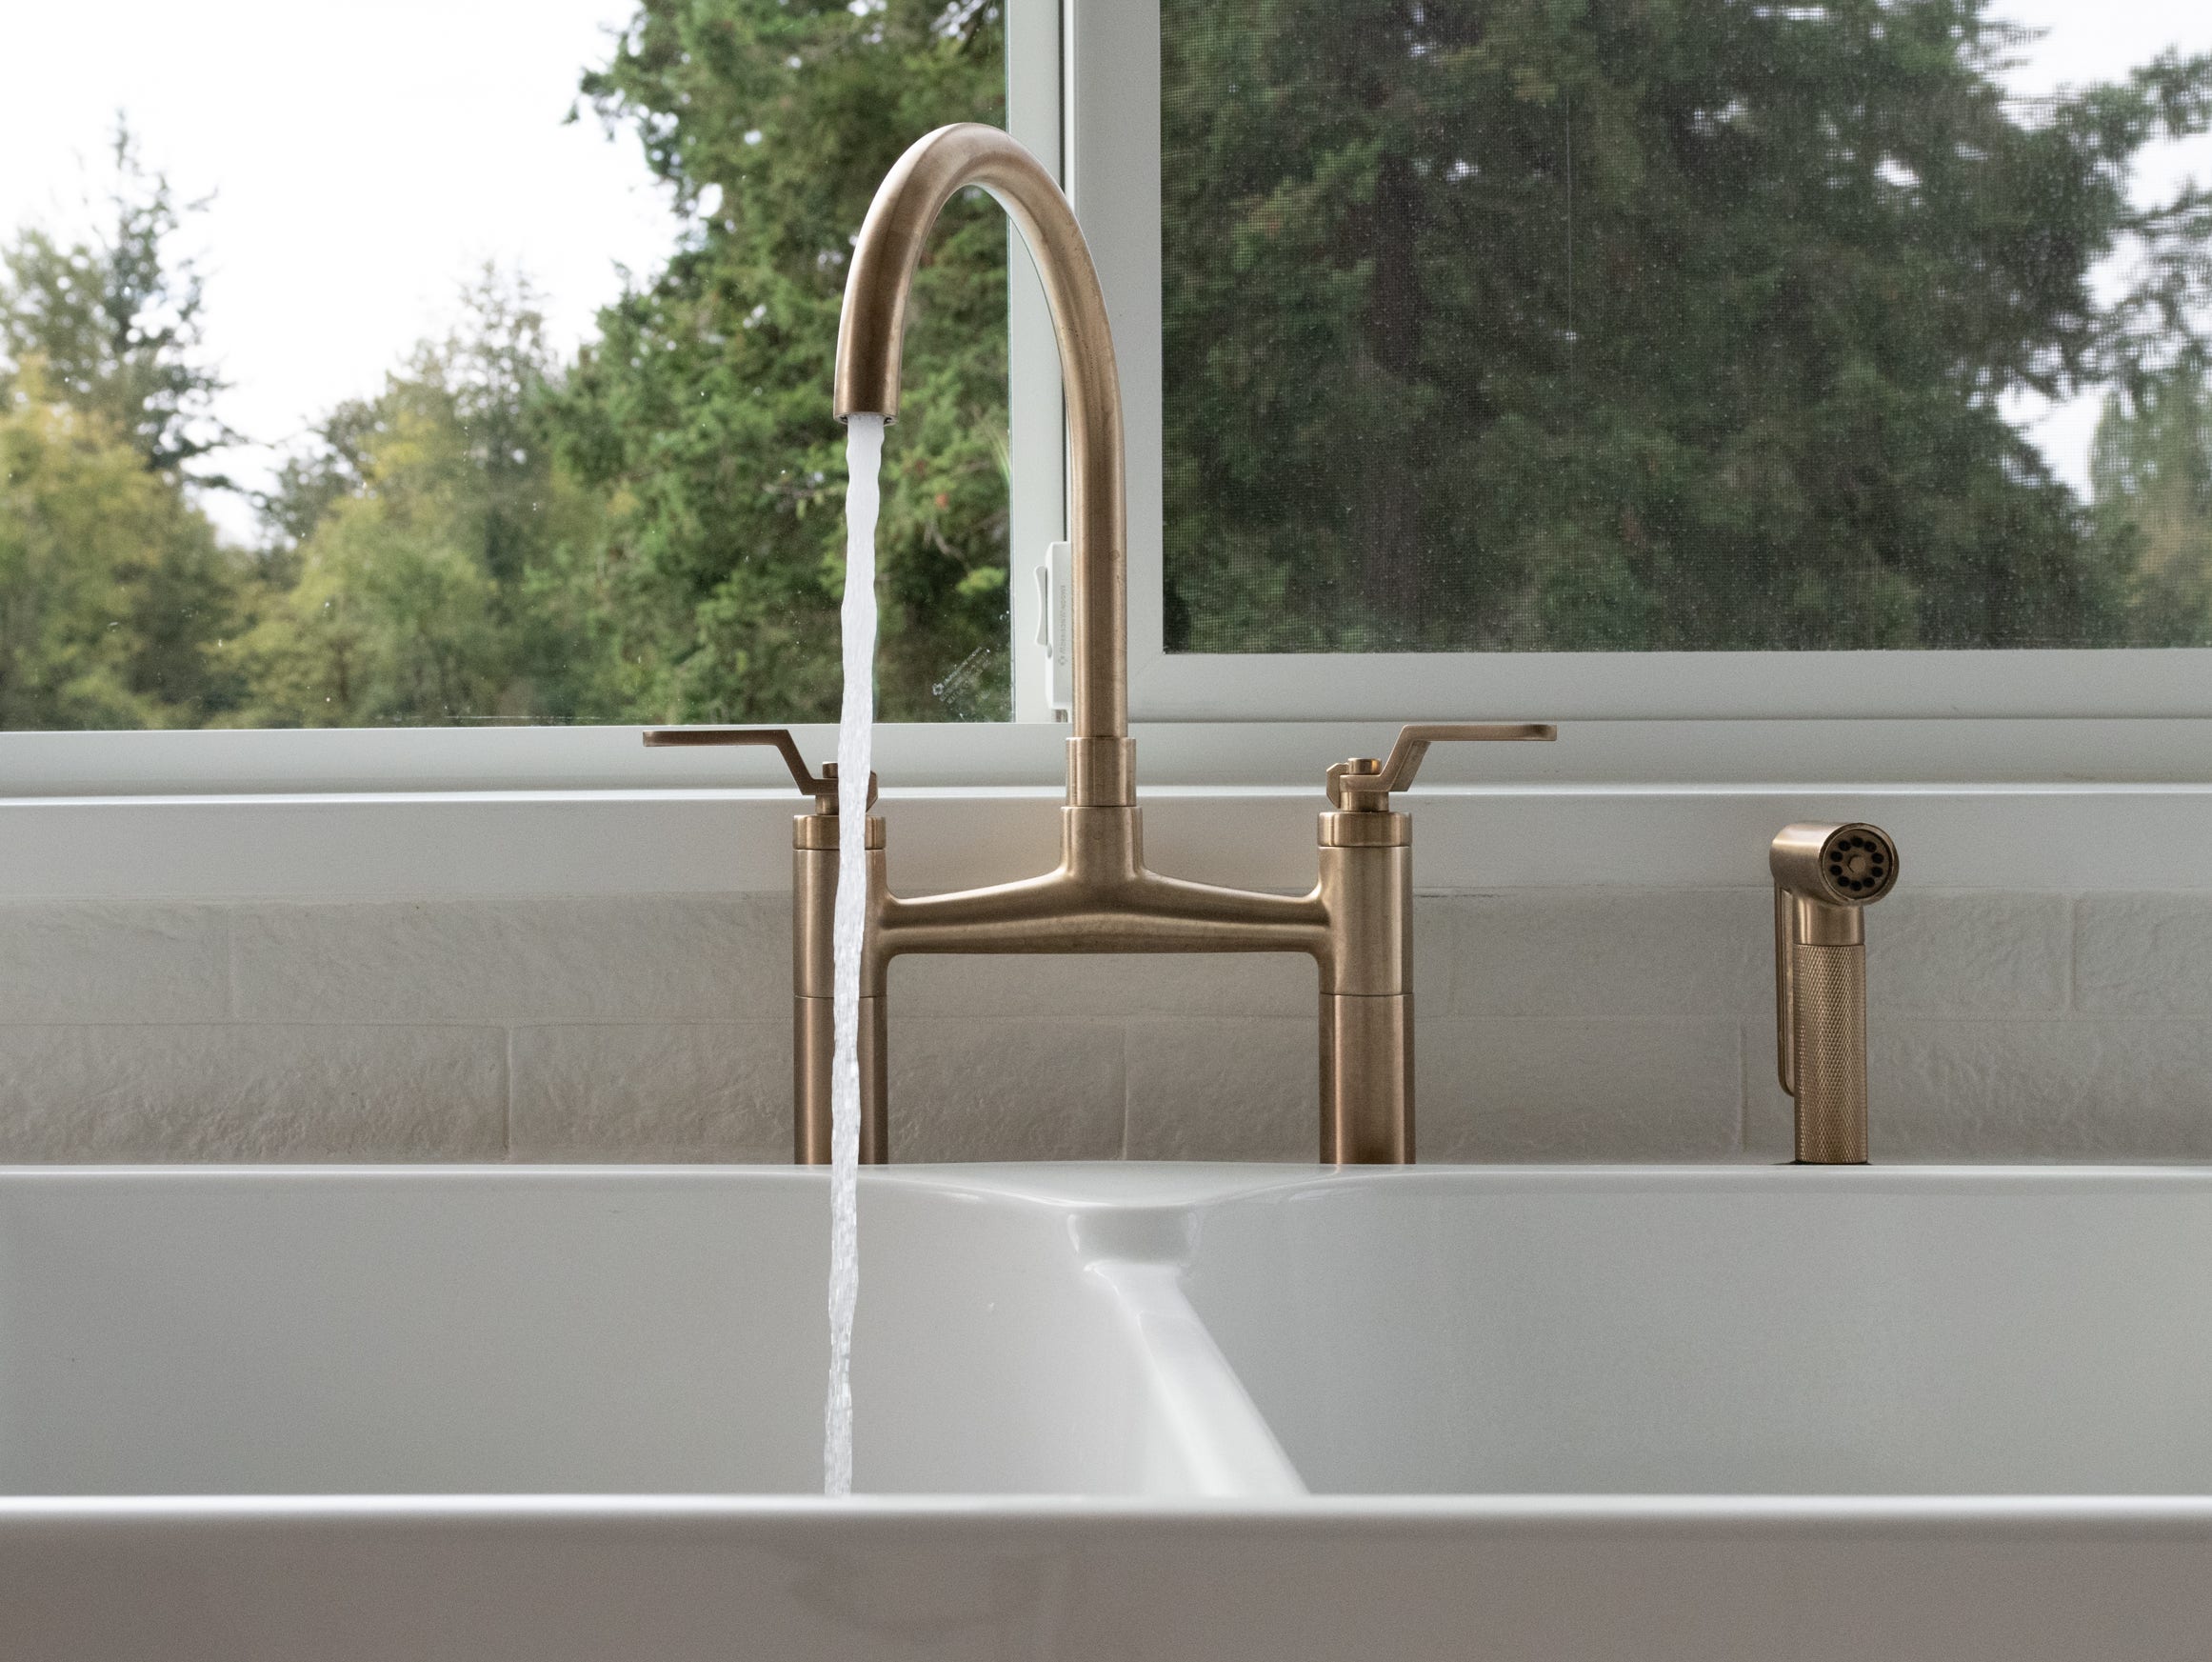 Gold water faucet in the kitchen of a modern, brightly lit suburban upscale farmhouse.